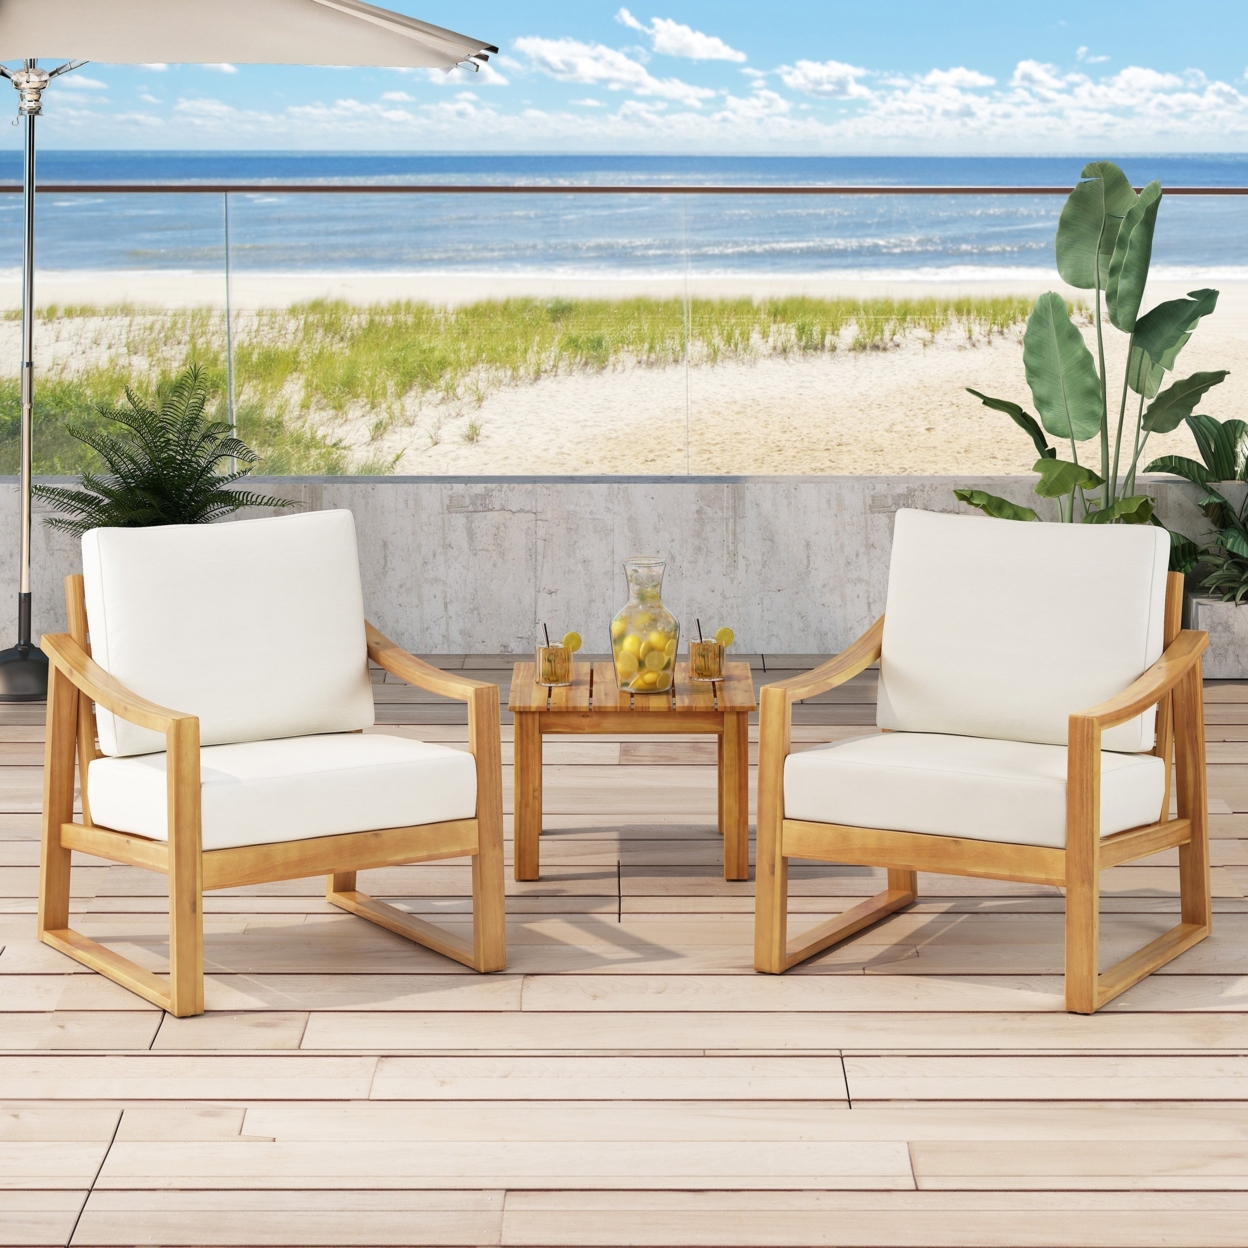 Johnlucas Outdoor Acacia Wood Club Chairs With Water Resistant Cushions (Set Of 2) - Teak/beige